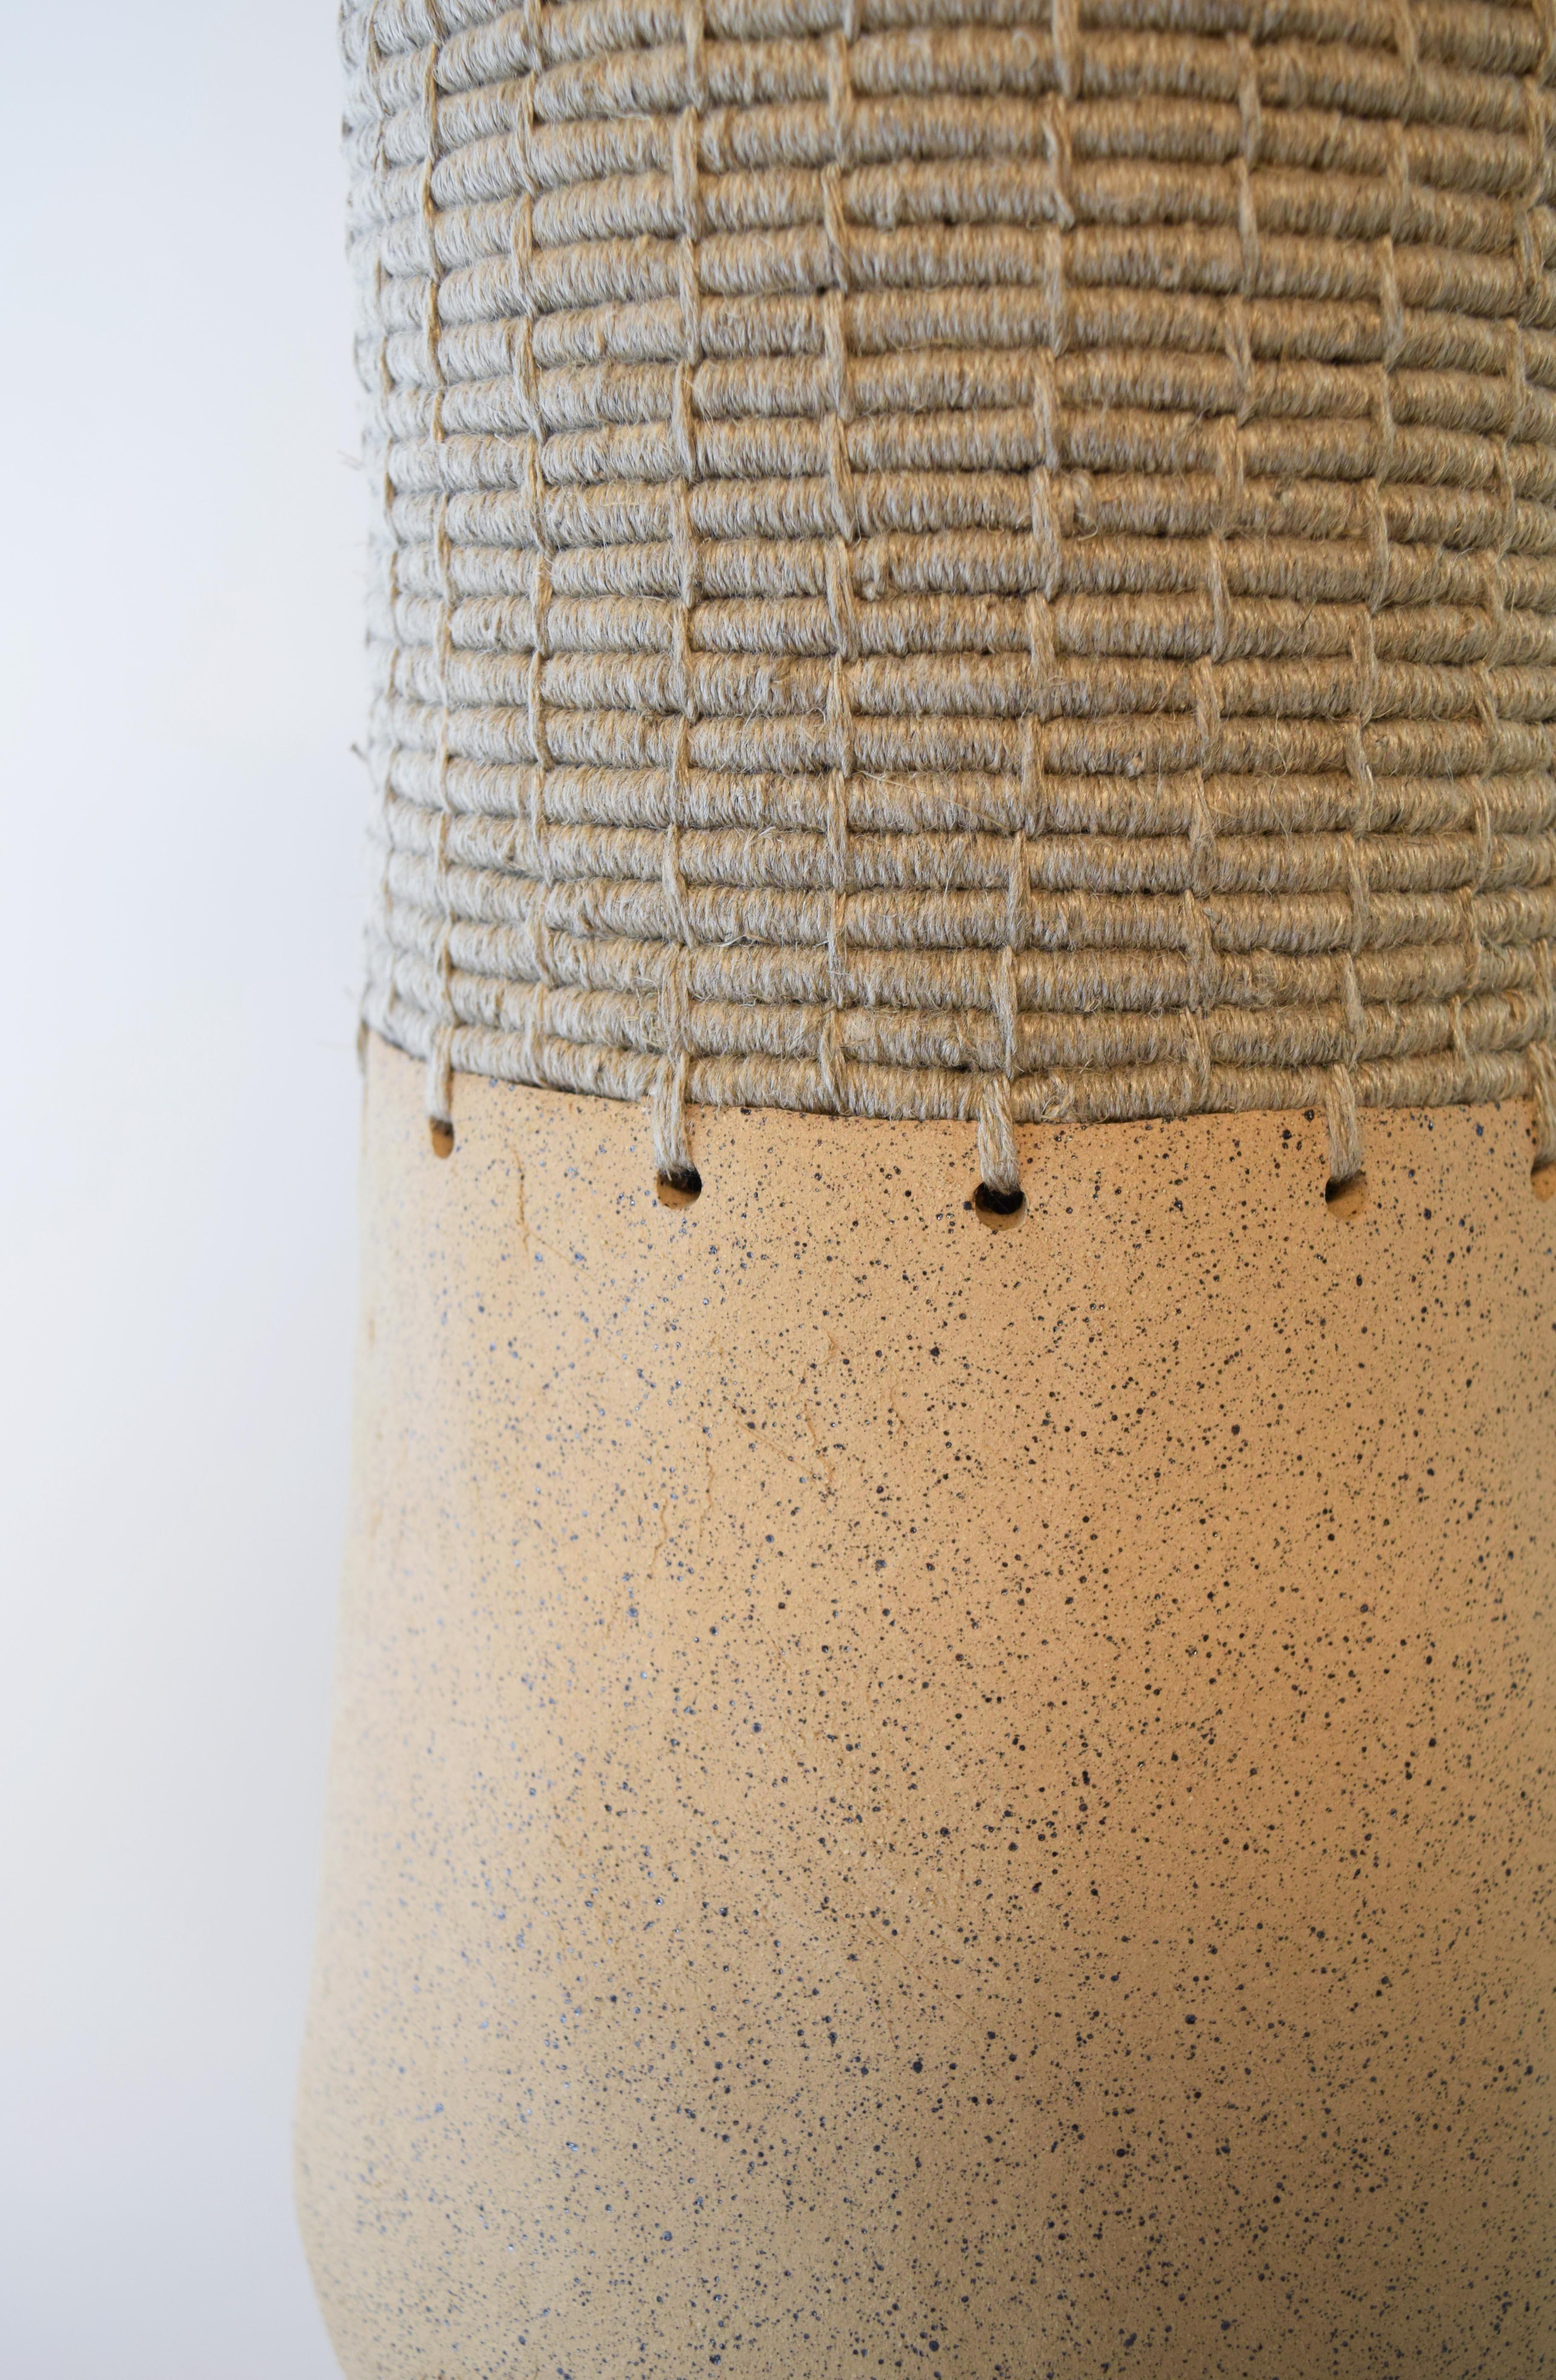 One of a kind Vessel #763 by Karen Gayle Tinney

Hand formed stoneware base with unglazed speckled beige clay. The top part is woven in natural linen.

17.25”H x 7”W

One of a kind collections with a limited number of pieces are released